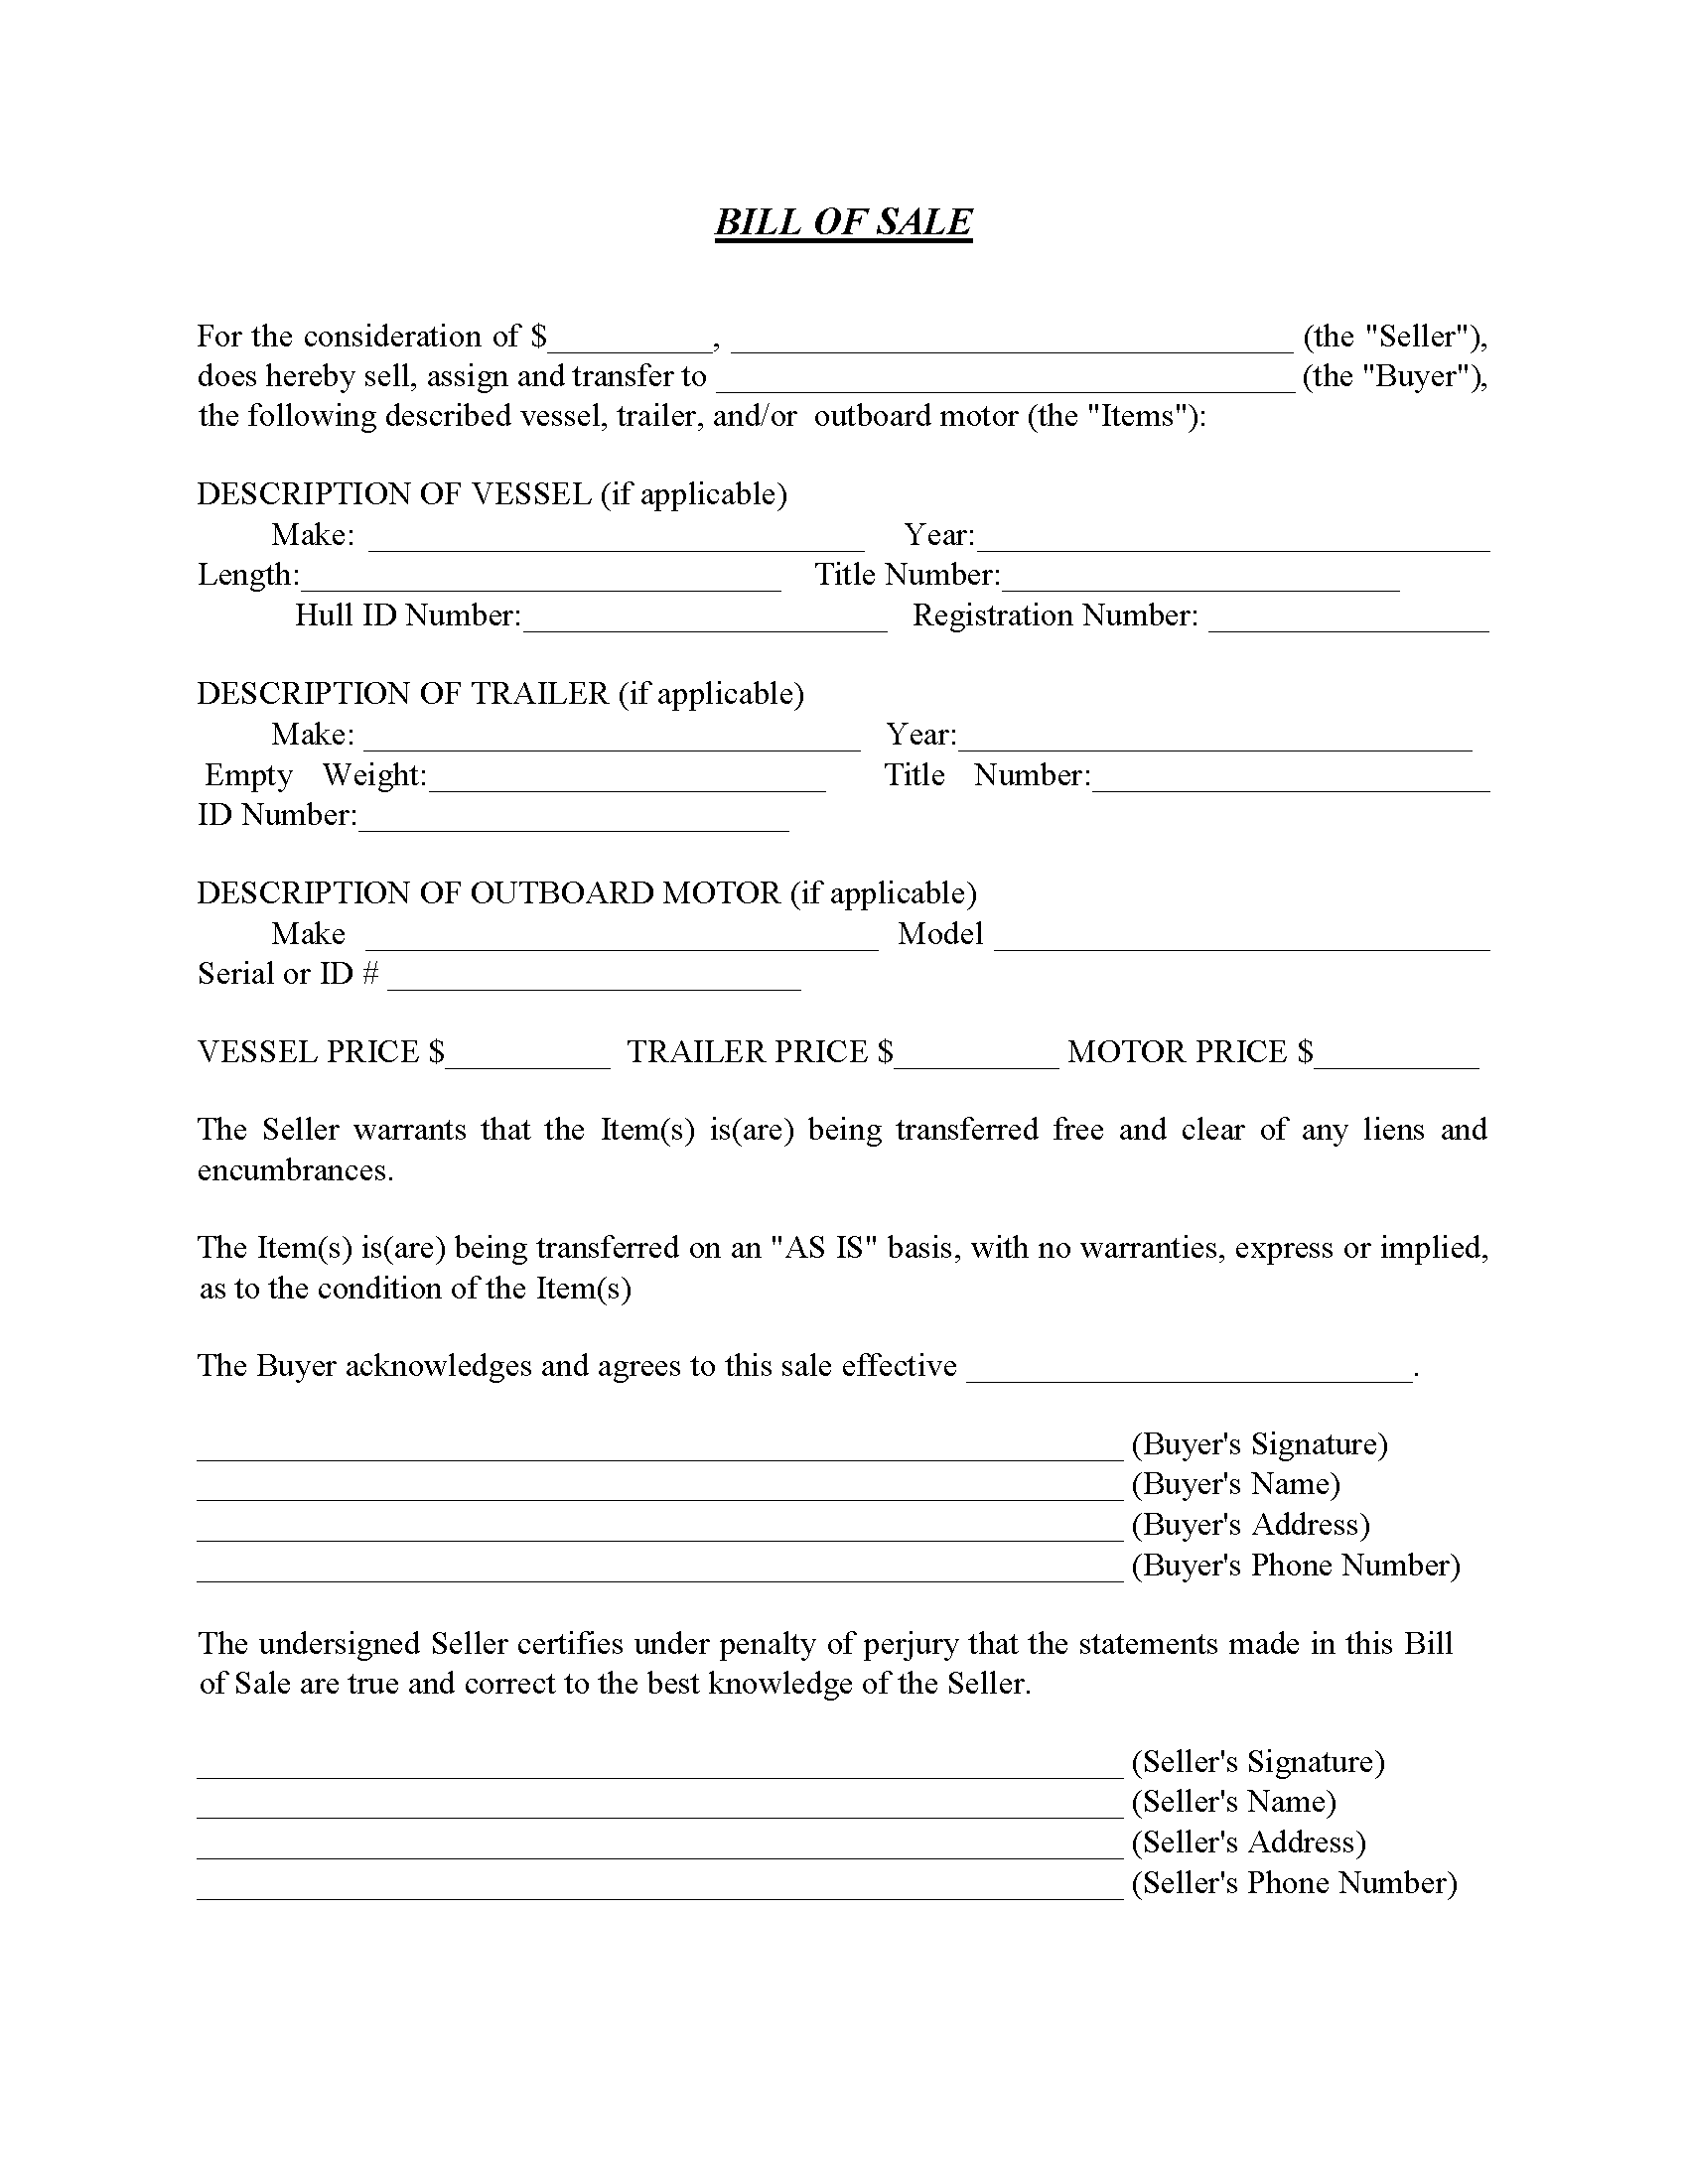 boat-and-trailer-bill-of-sale-form-free-printable-legal-forms